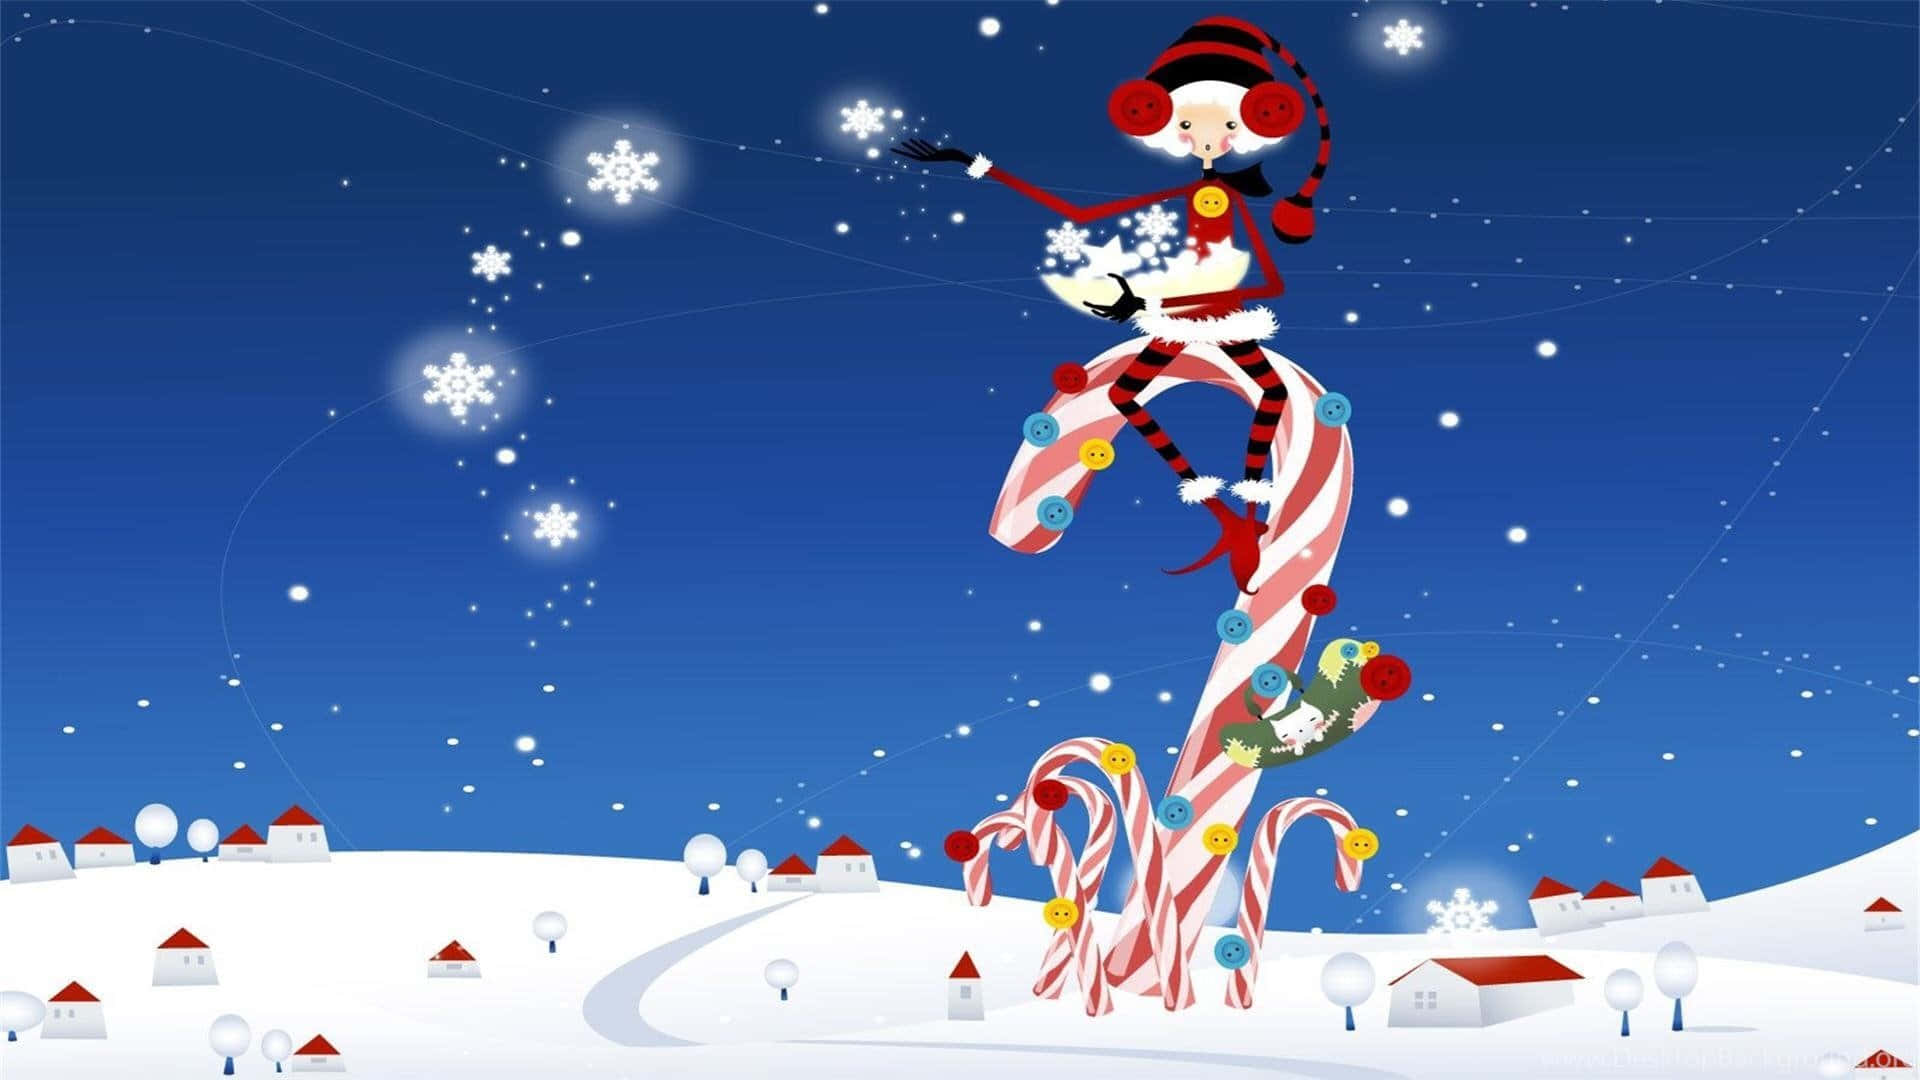 Download Funny Christmas Zoom Background 1920 x 1080 